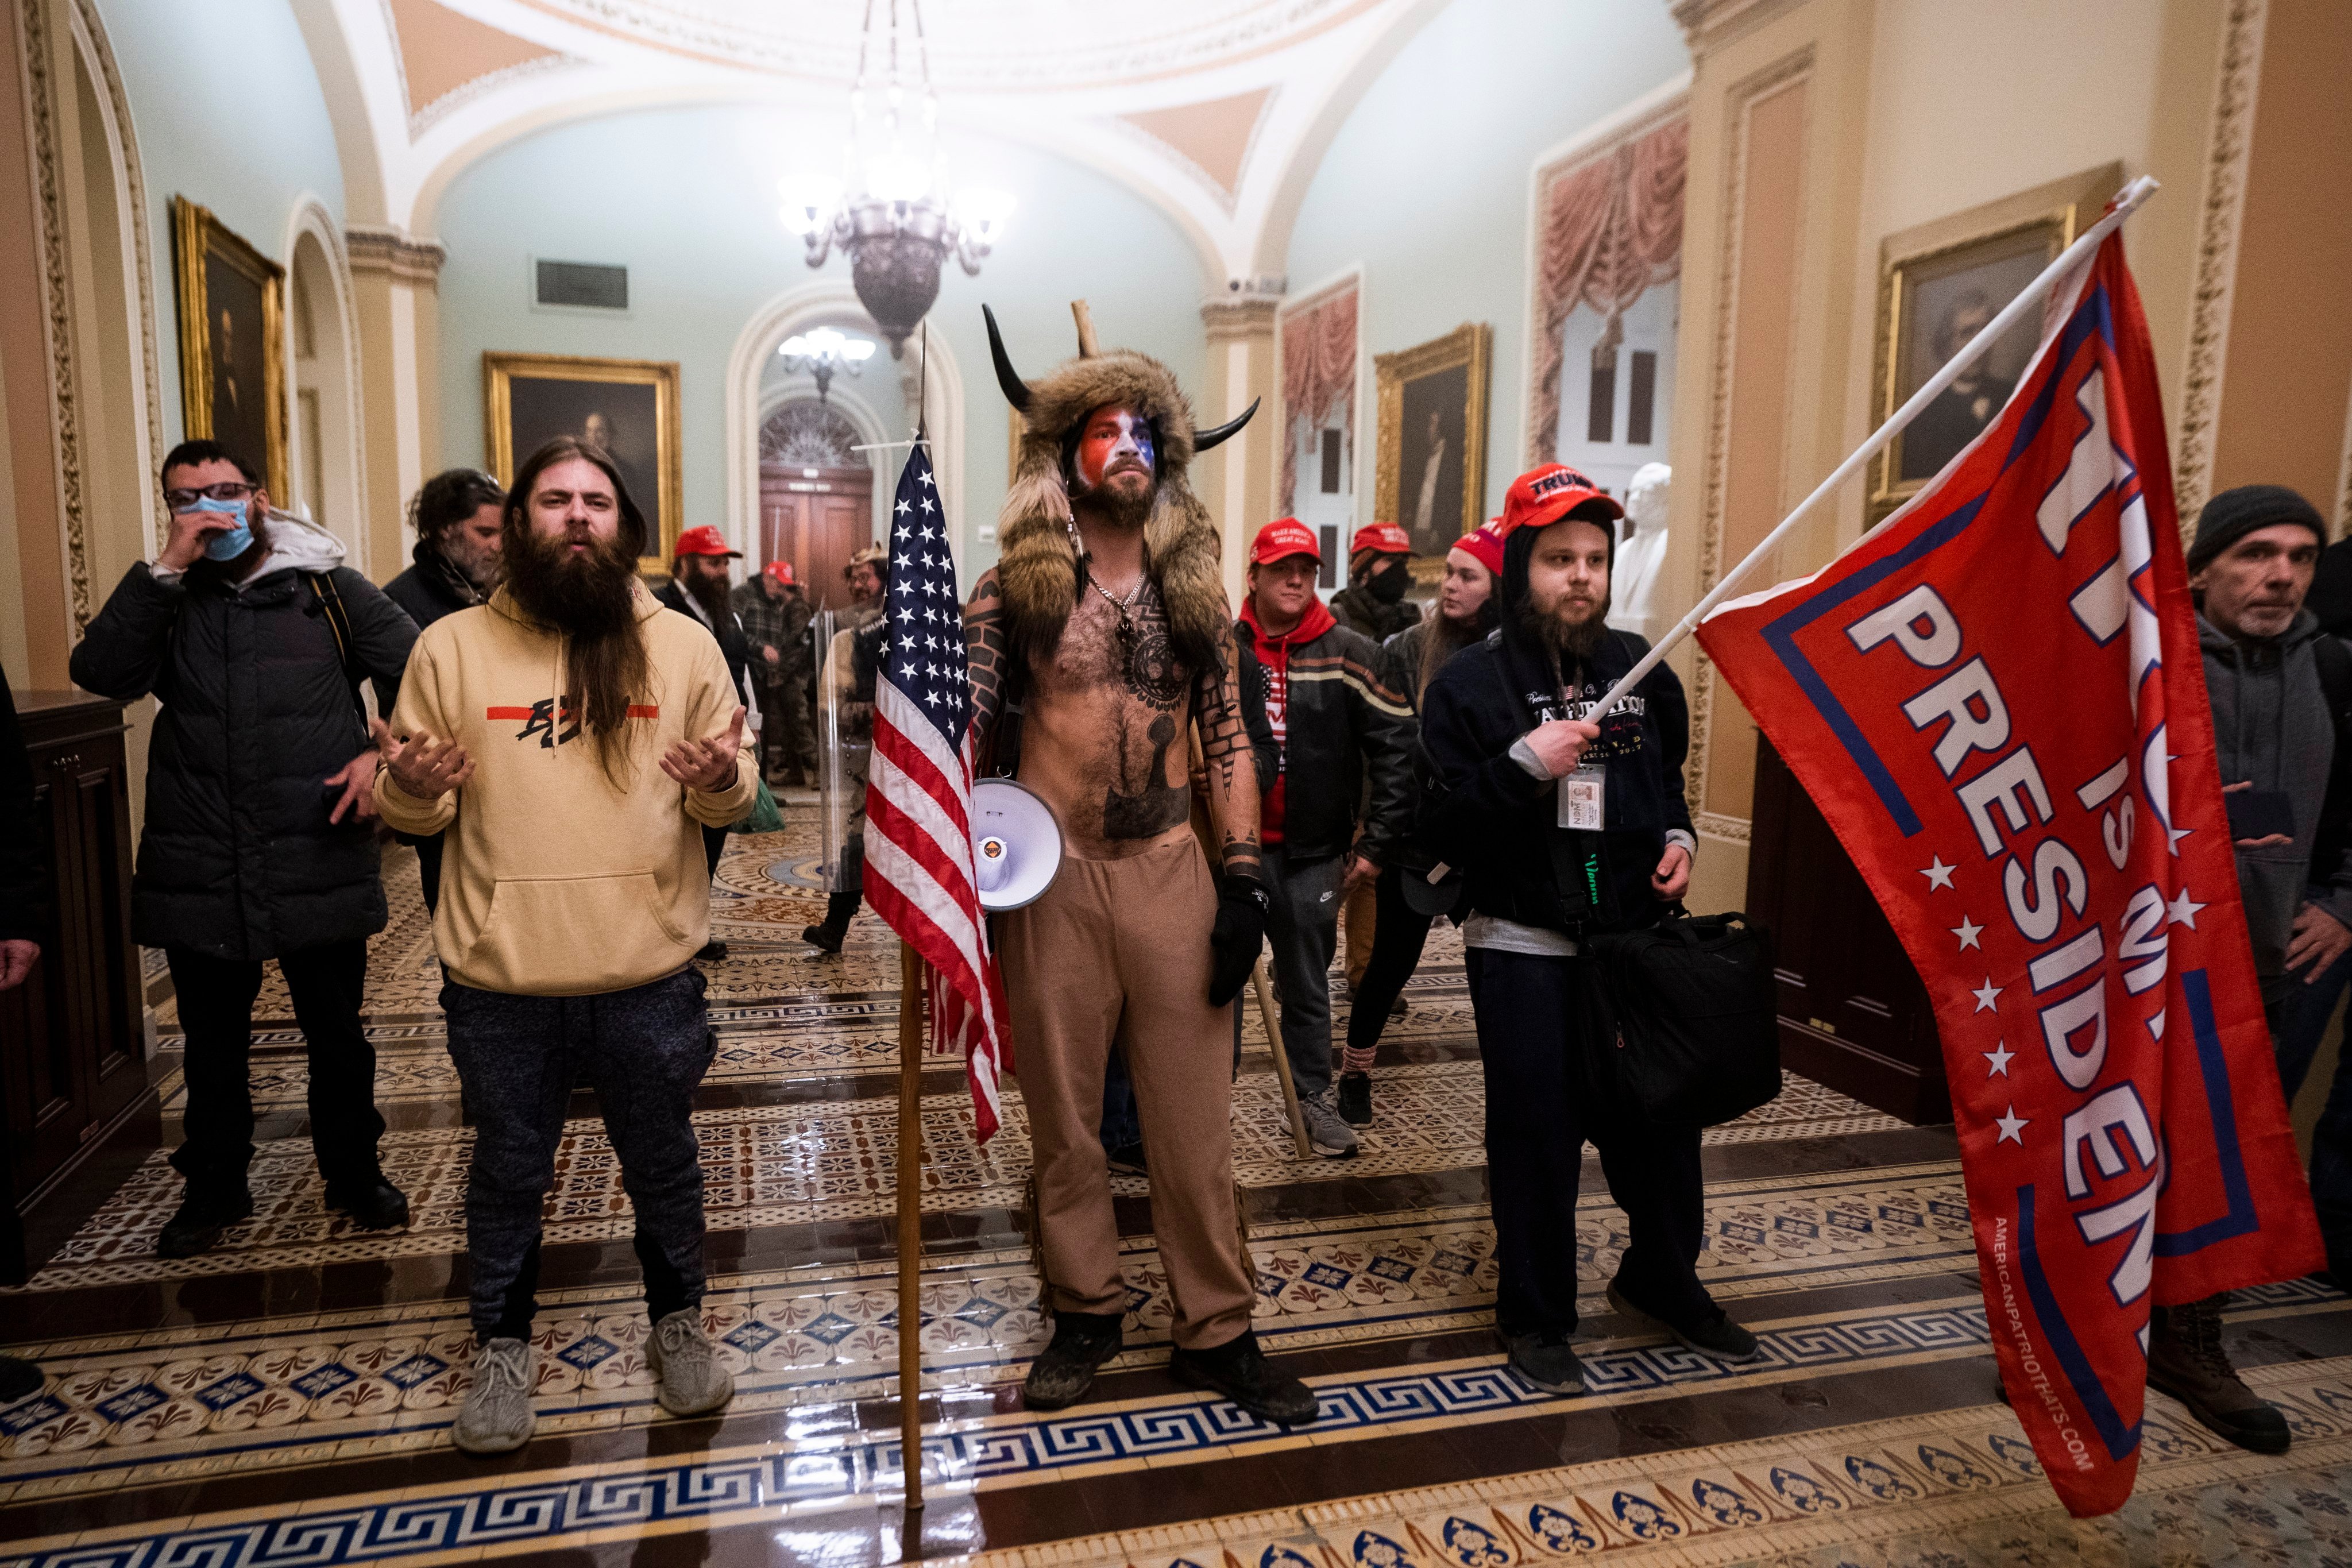 Supporters of Donald Trump break into the Capitol building in Washington on January 6, 2021, after Trump refused to concede the victory of Joe Biden in the presidential election, claiming voter fraud. Photo: EPA-EFE